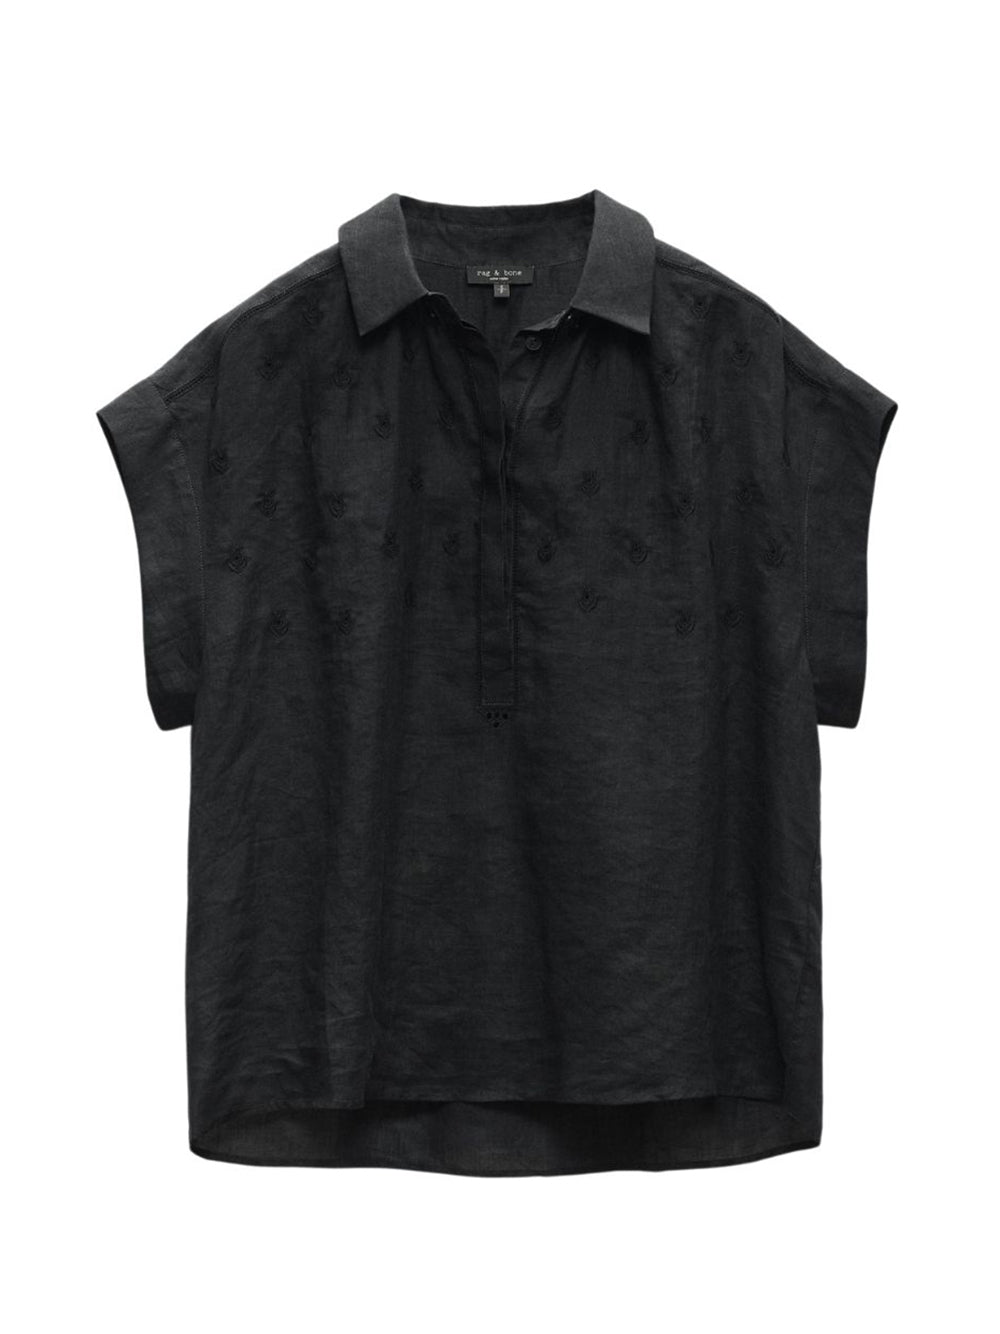 Robin Embroidered Top (Black)